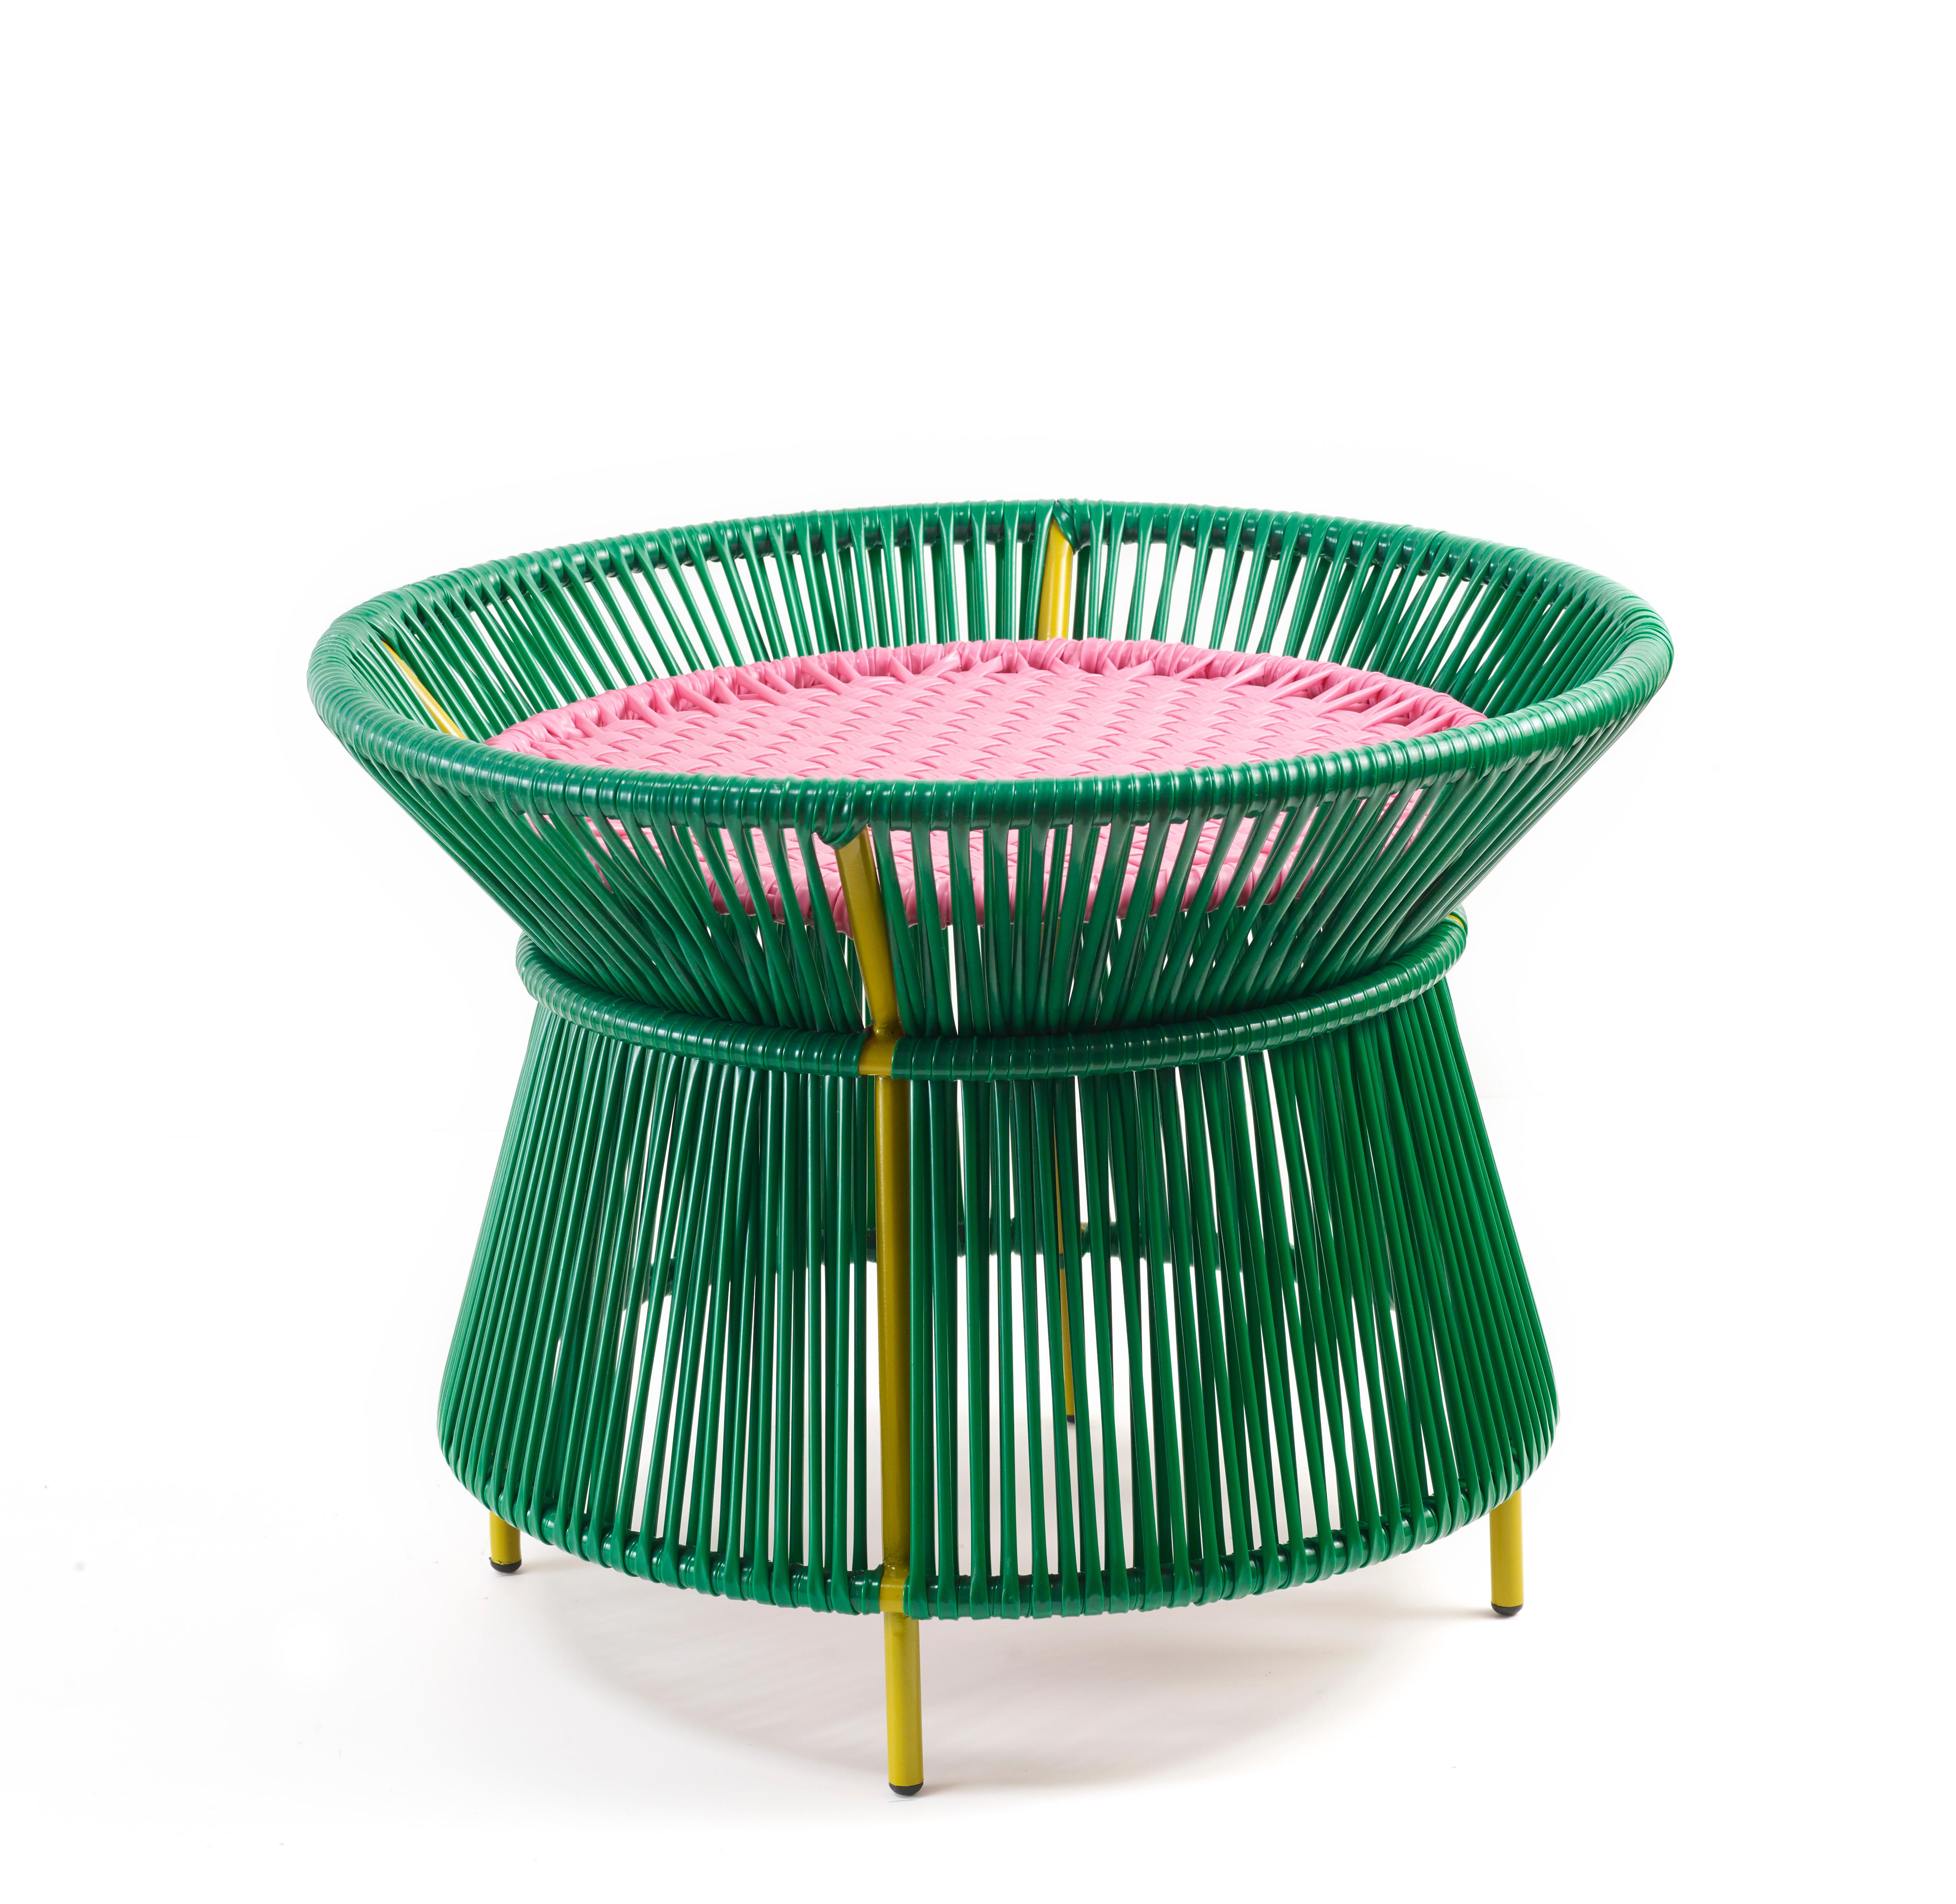 Green caribe basket table by Sebastian Herkner.
Materials: Galvanized and powder-coated tubular steel. PVC strings are made from recycled plastic.
Technique: Made from recycled plastic and weaved by local craftspeople in Colombia. 
Dimensions: